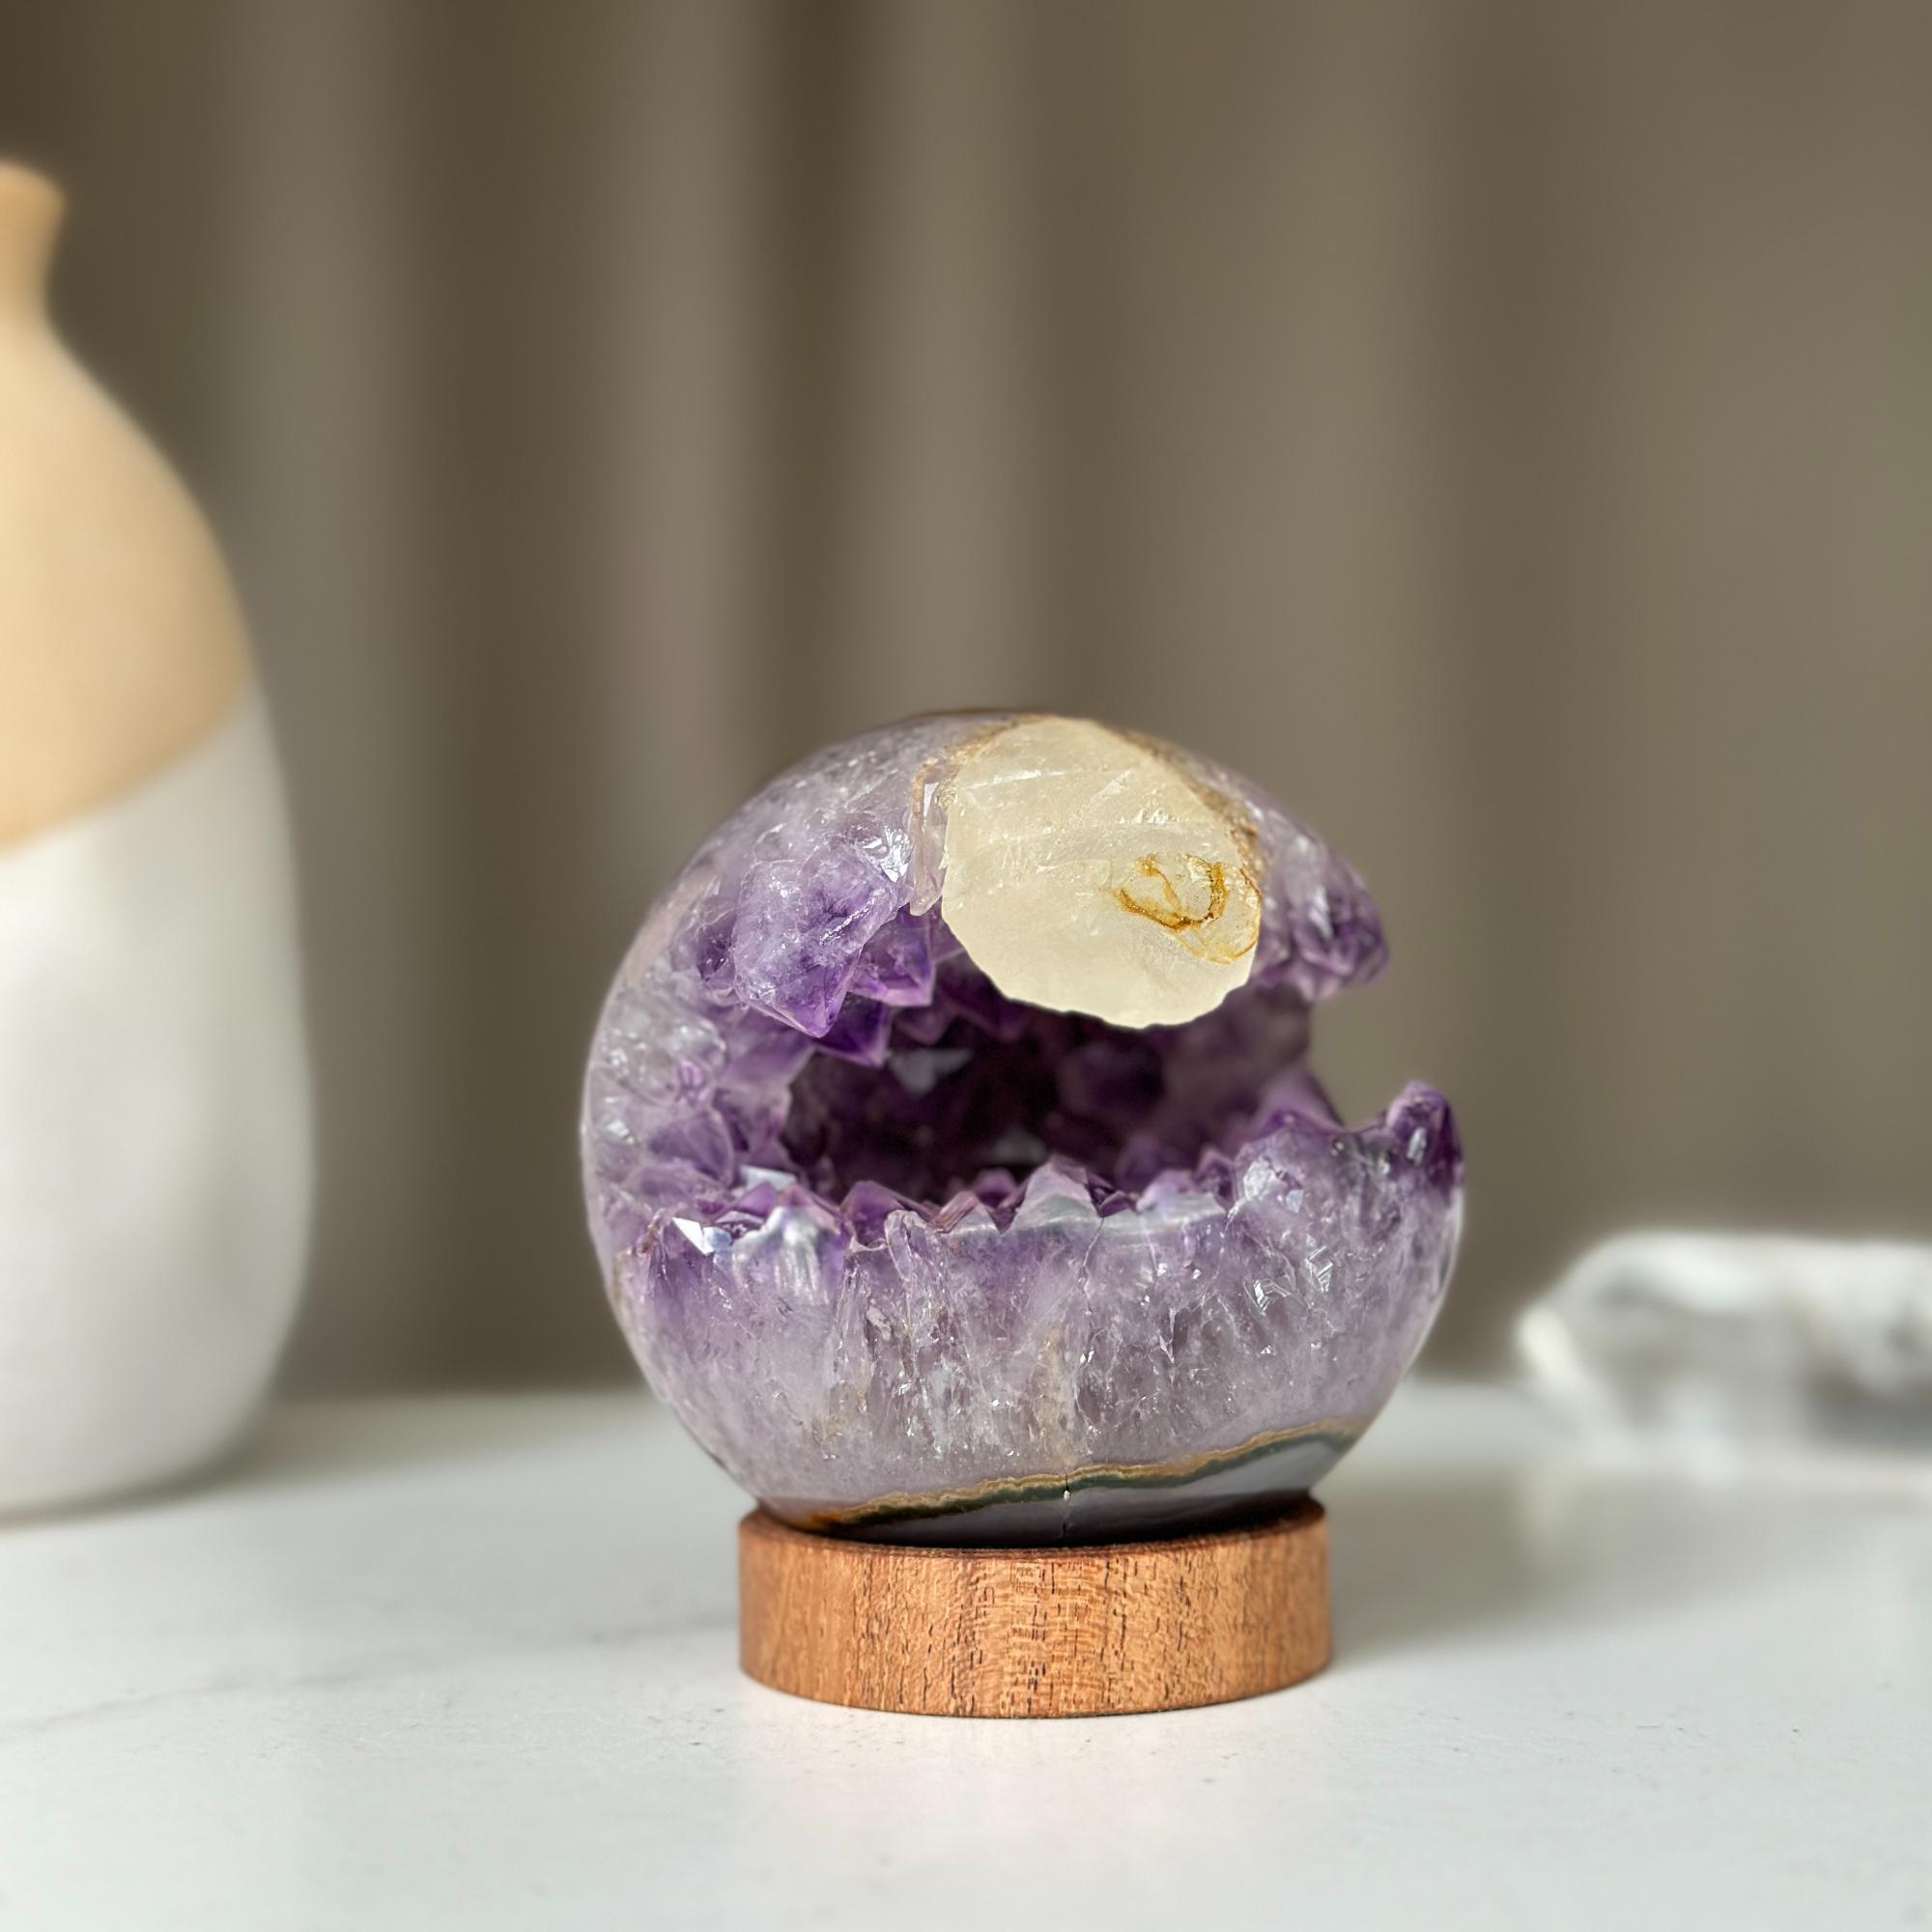 Amethyst sphere with agate layers, Crystal Ball 1 Lb, Large Agate sphere, Top quality crystal ball